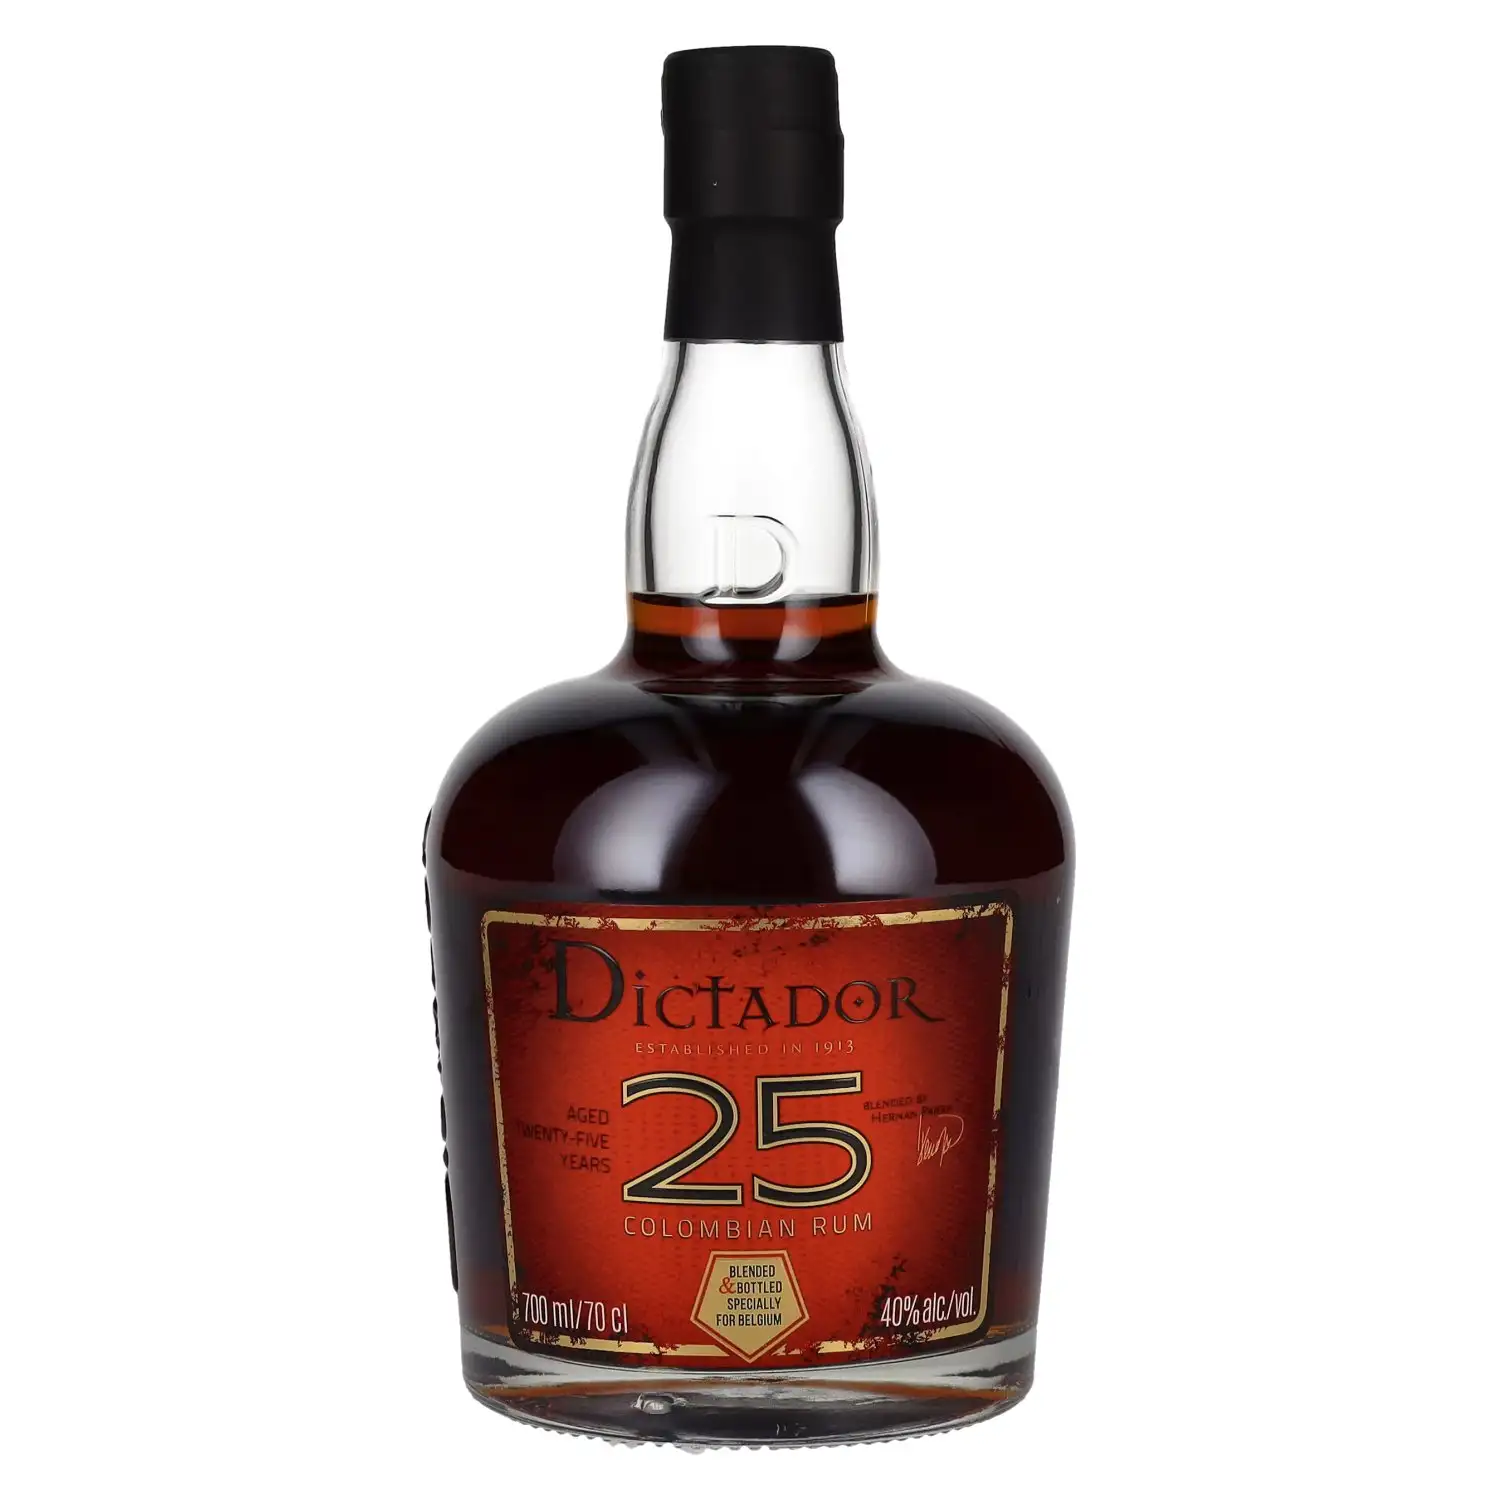 Image of the front of the bottle of the rum Dictador 25 Colombian Rum